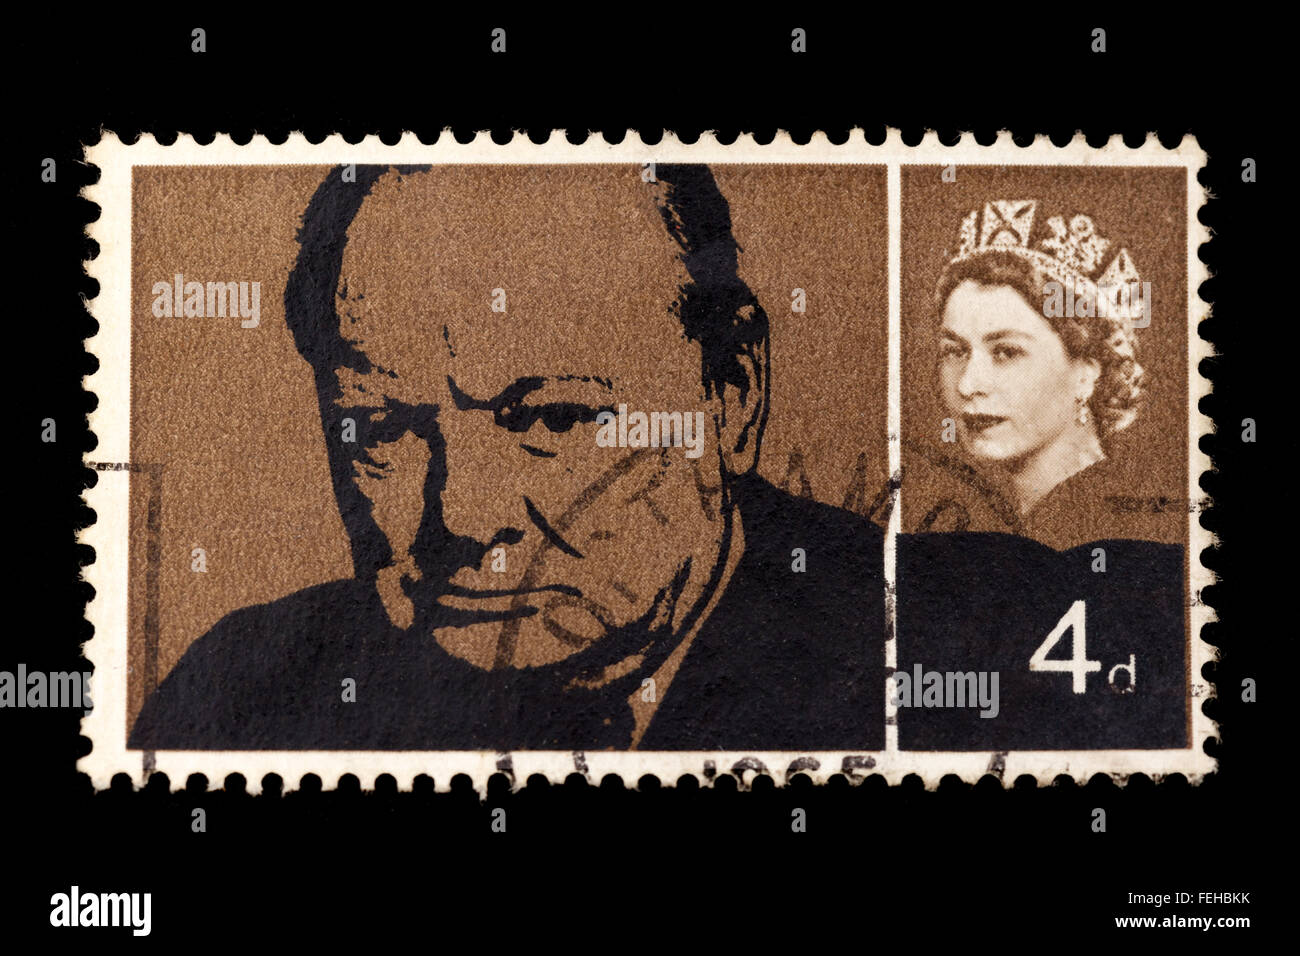 1965 GB commemorative stamp for the death of Winston Churchill, UK Stock Photo